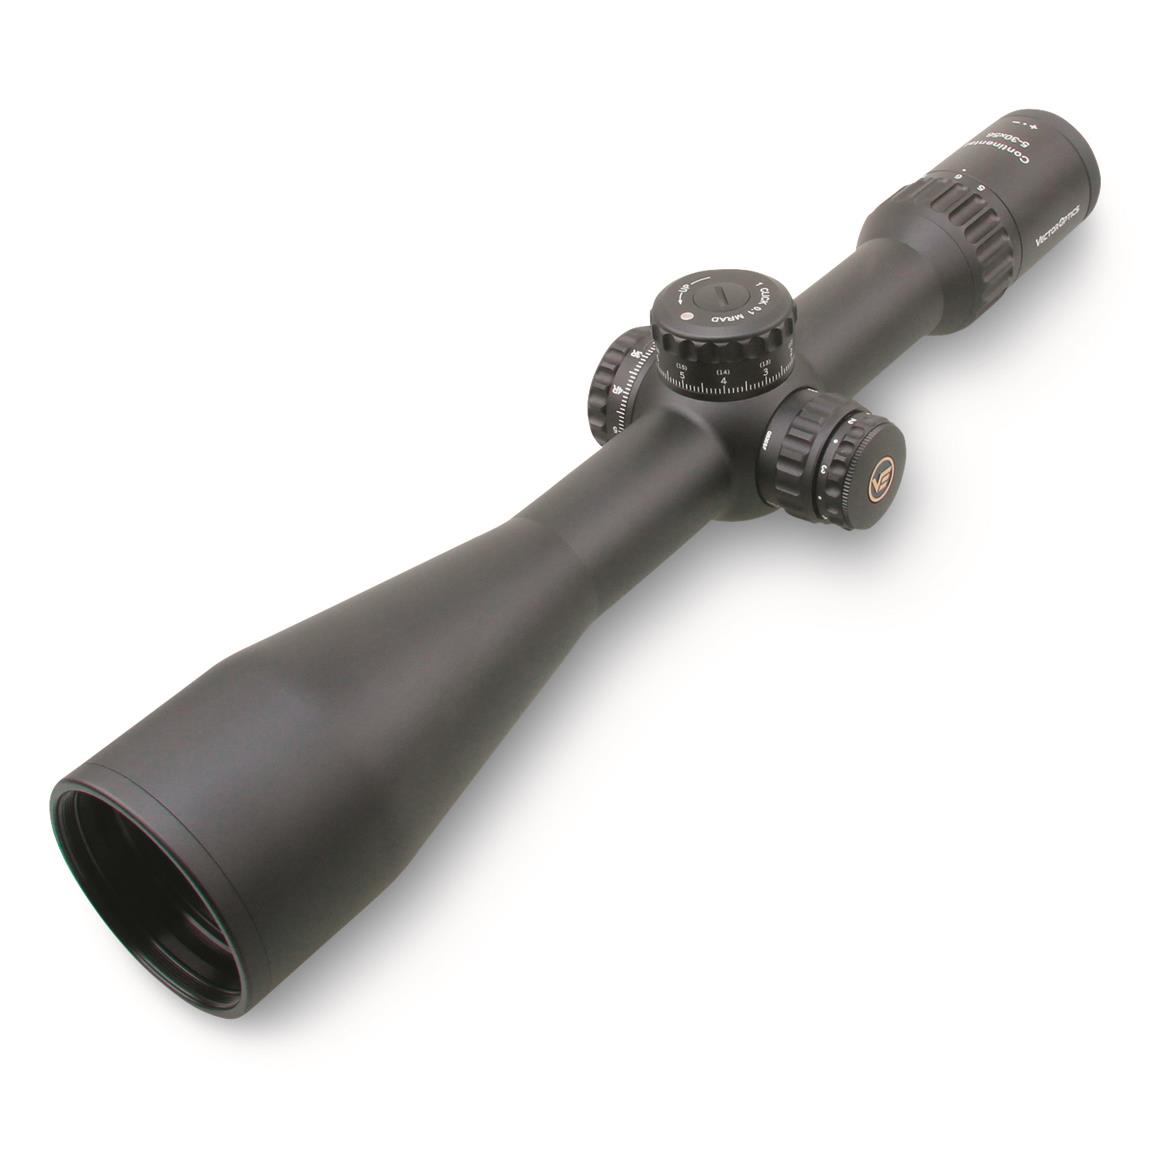 Vector Continental X6 5-30x56mm Rifle Scope, FFP VEC-MBR Ranging Illuminated Reticle